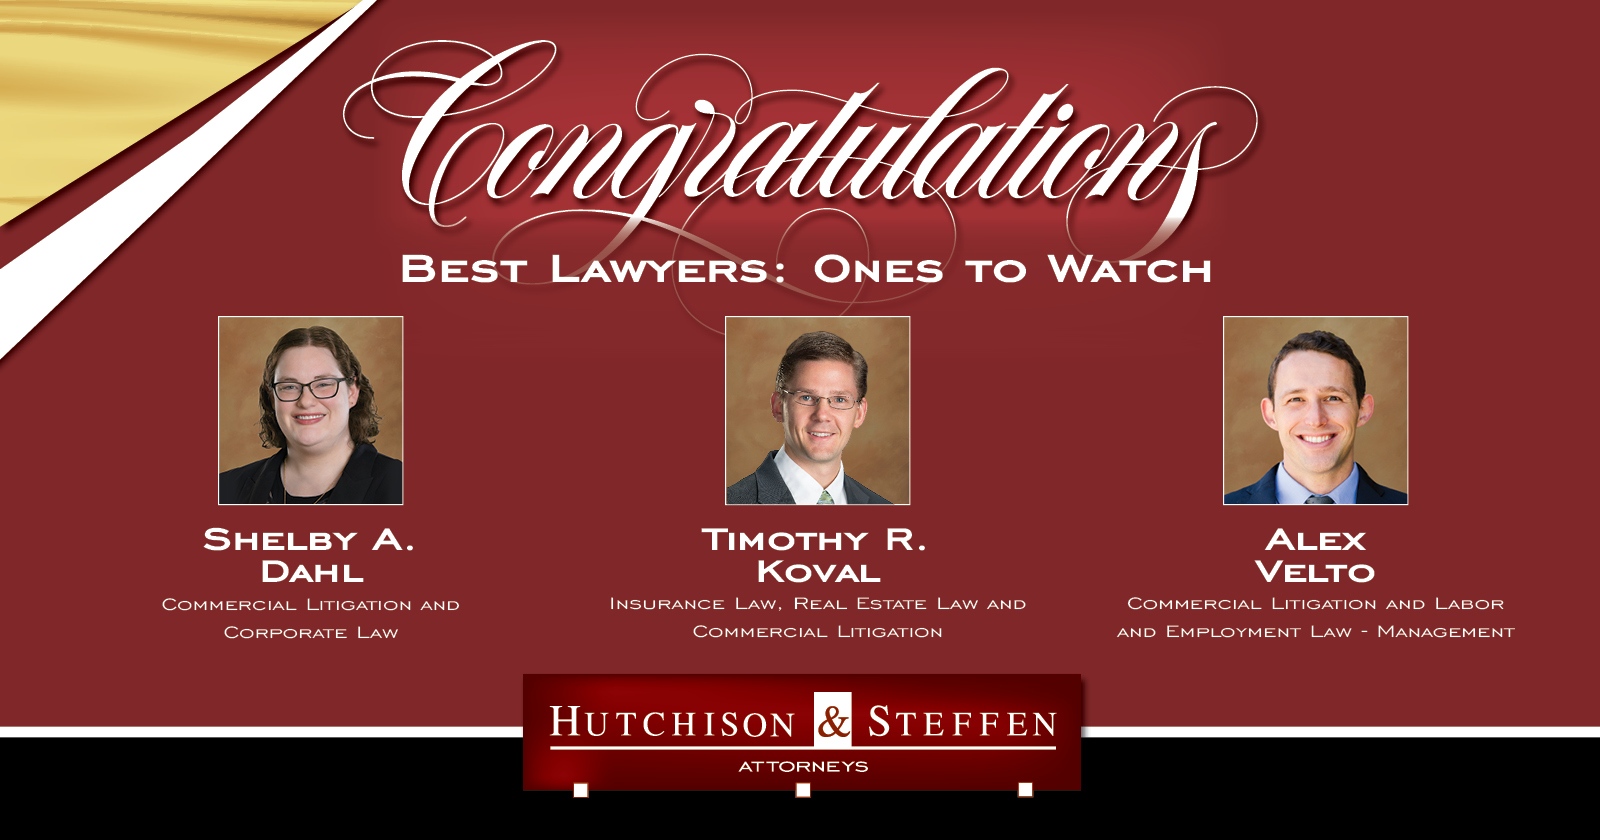 Congratulations Best Lawyers: Ones To Watch